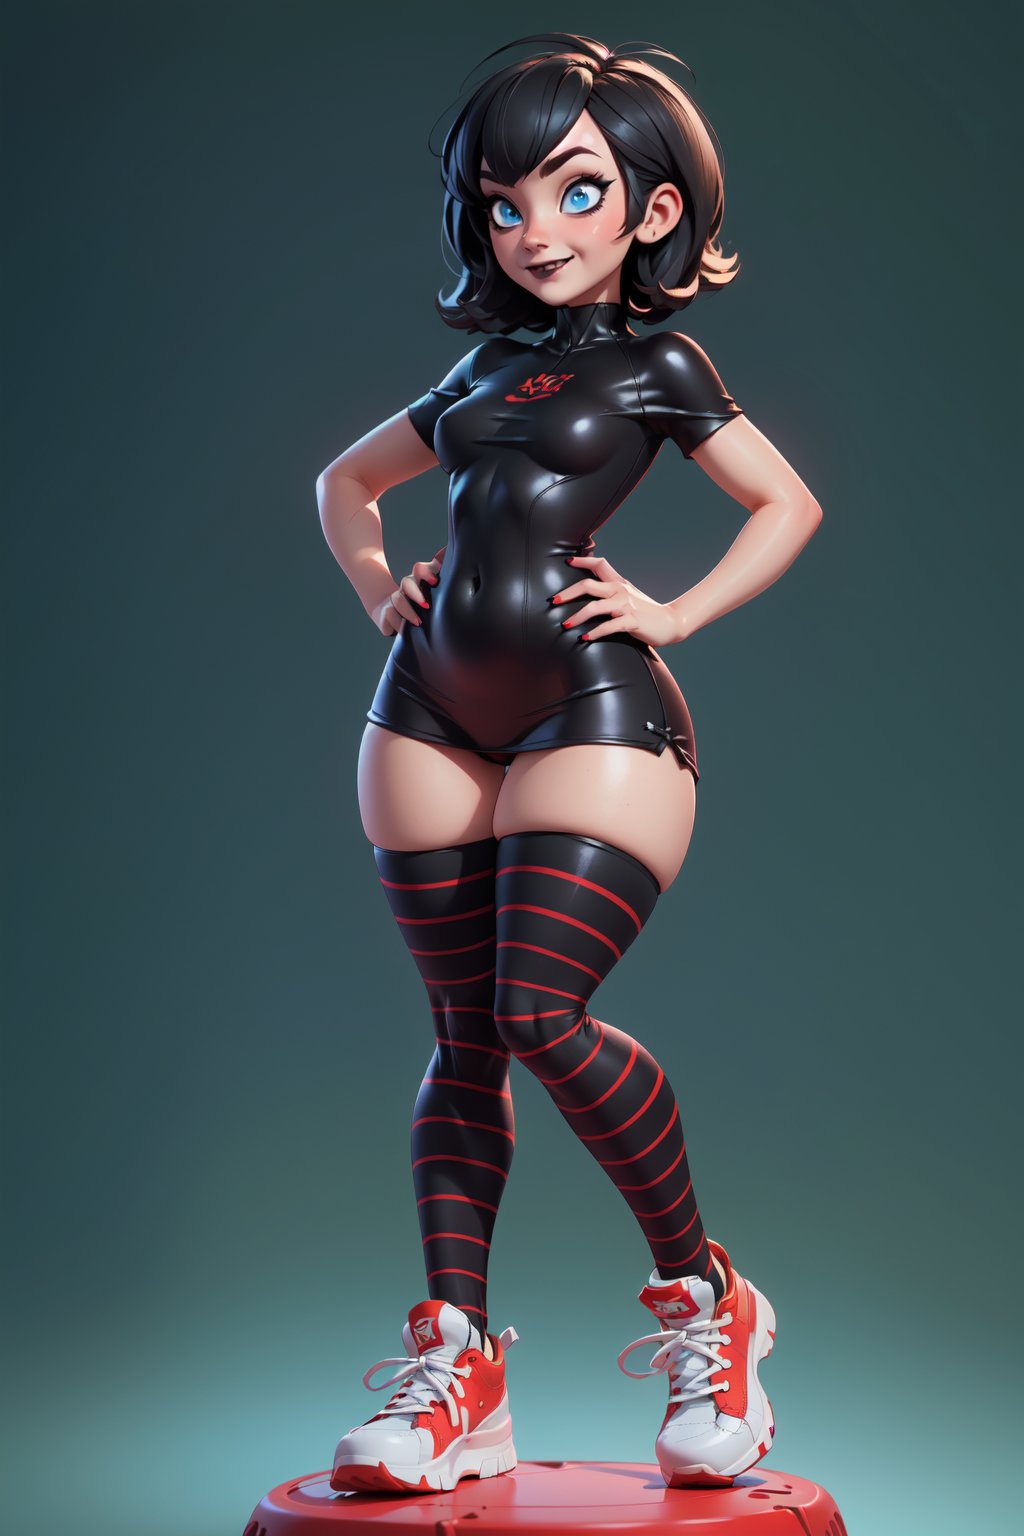 beautiful girl as mavis dracula, shy , (pale skin) , corner smile,   blushing , full body, standing, action pose, (curvy body), (small breasts:1.3) ,  (thick legs) , (black lipstick ) , (defined body), (black shirt)   , (red sneakers allstar) , (red and black striped stockings) ,  highly detailed light blue eyes, castle background, extremely detailed, center image, bright sides , masterpiece